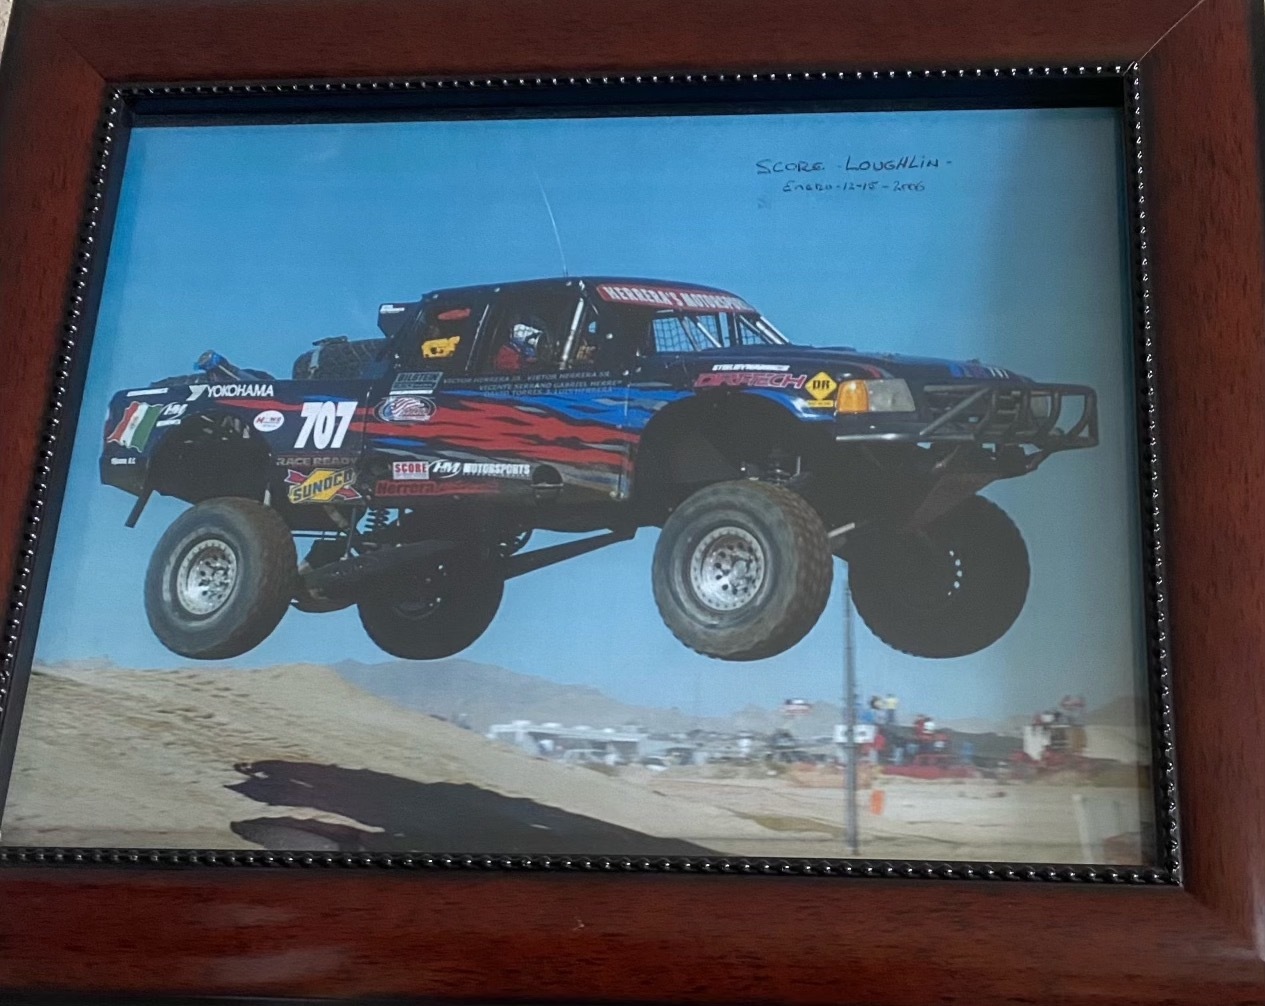 For Sale: Class 7 Winner / Championship Ford Truck - photo9